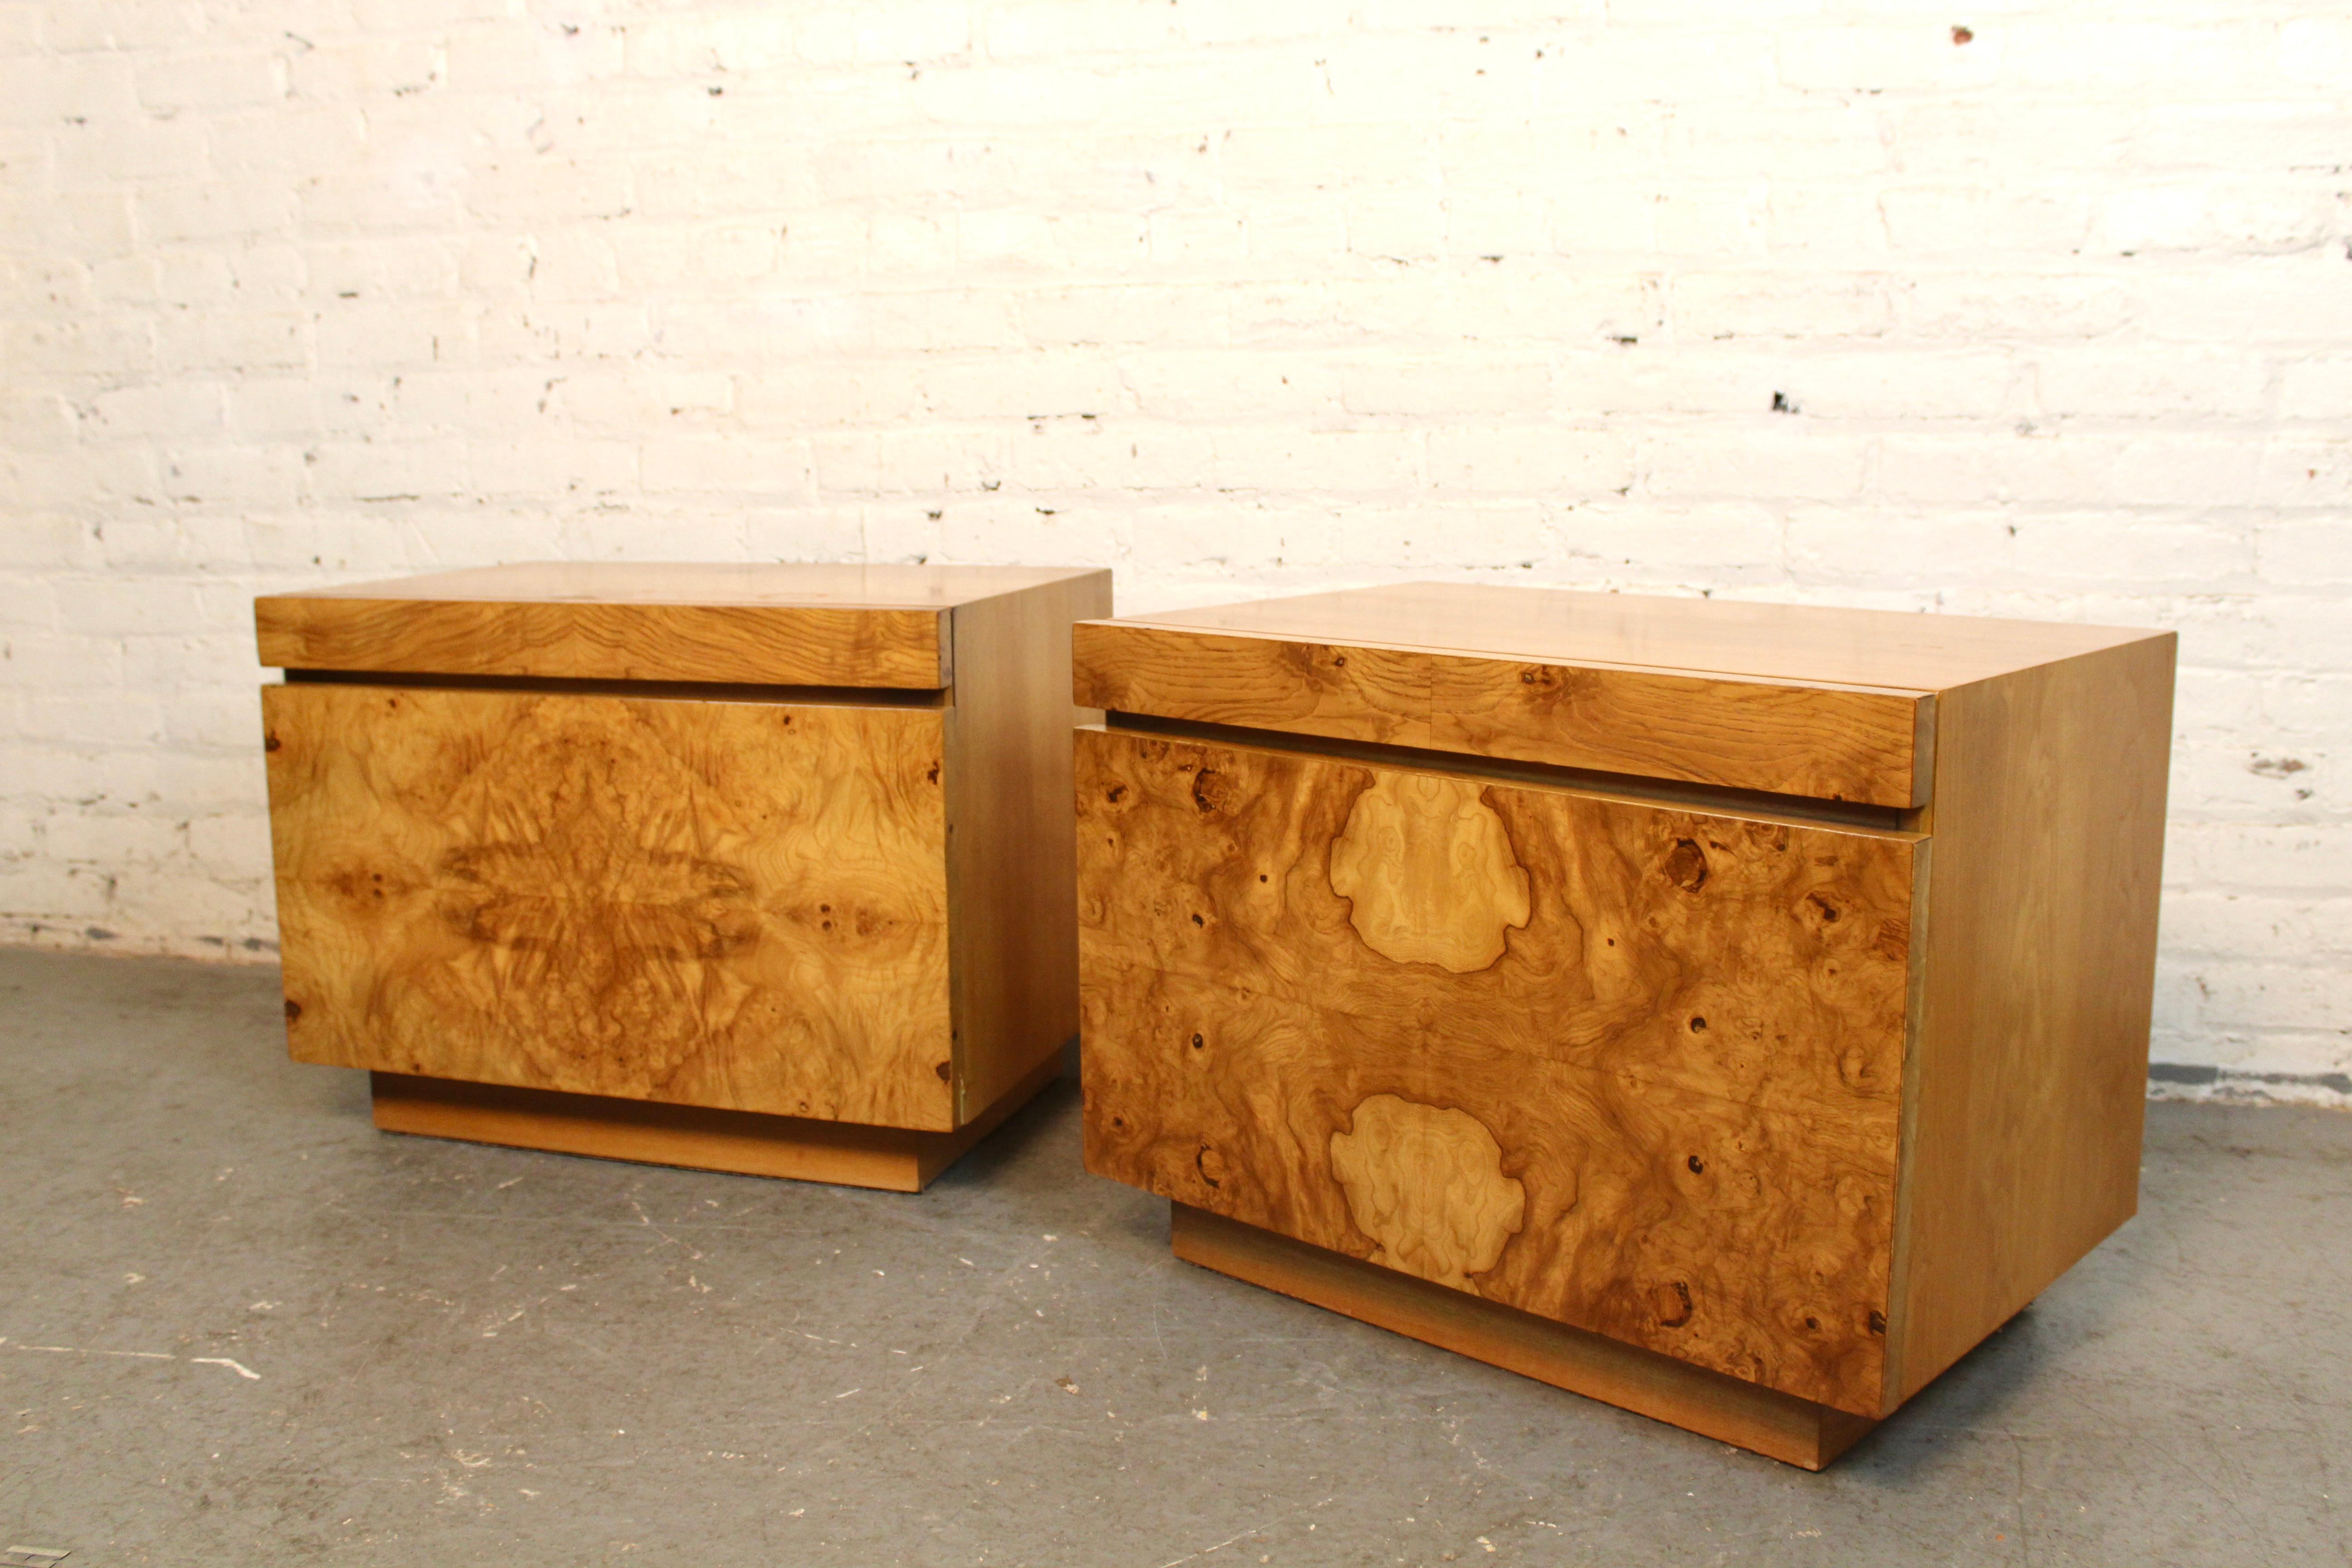 Timeless yet modern, the renowned “Alpha” series by designer Roland Carter for Lane Furniture of Virginia seamlessly blends clean brutalist lines with the wild organic swirls of oak burl wood. This stunning pair of nightstands features two spacious